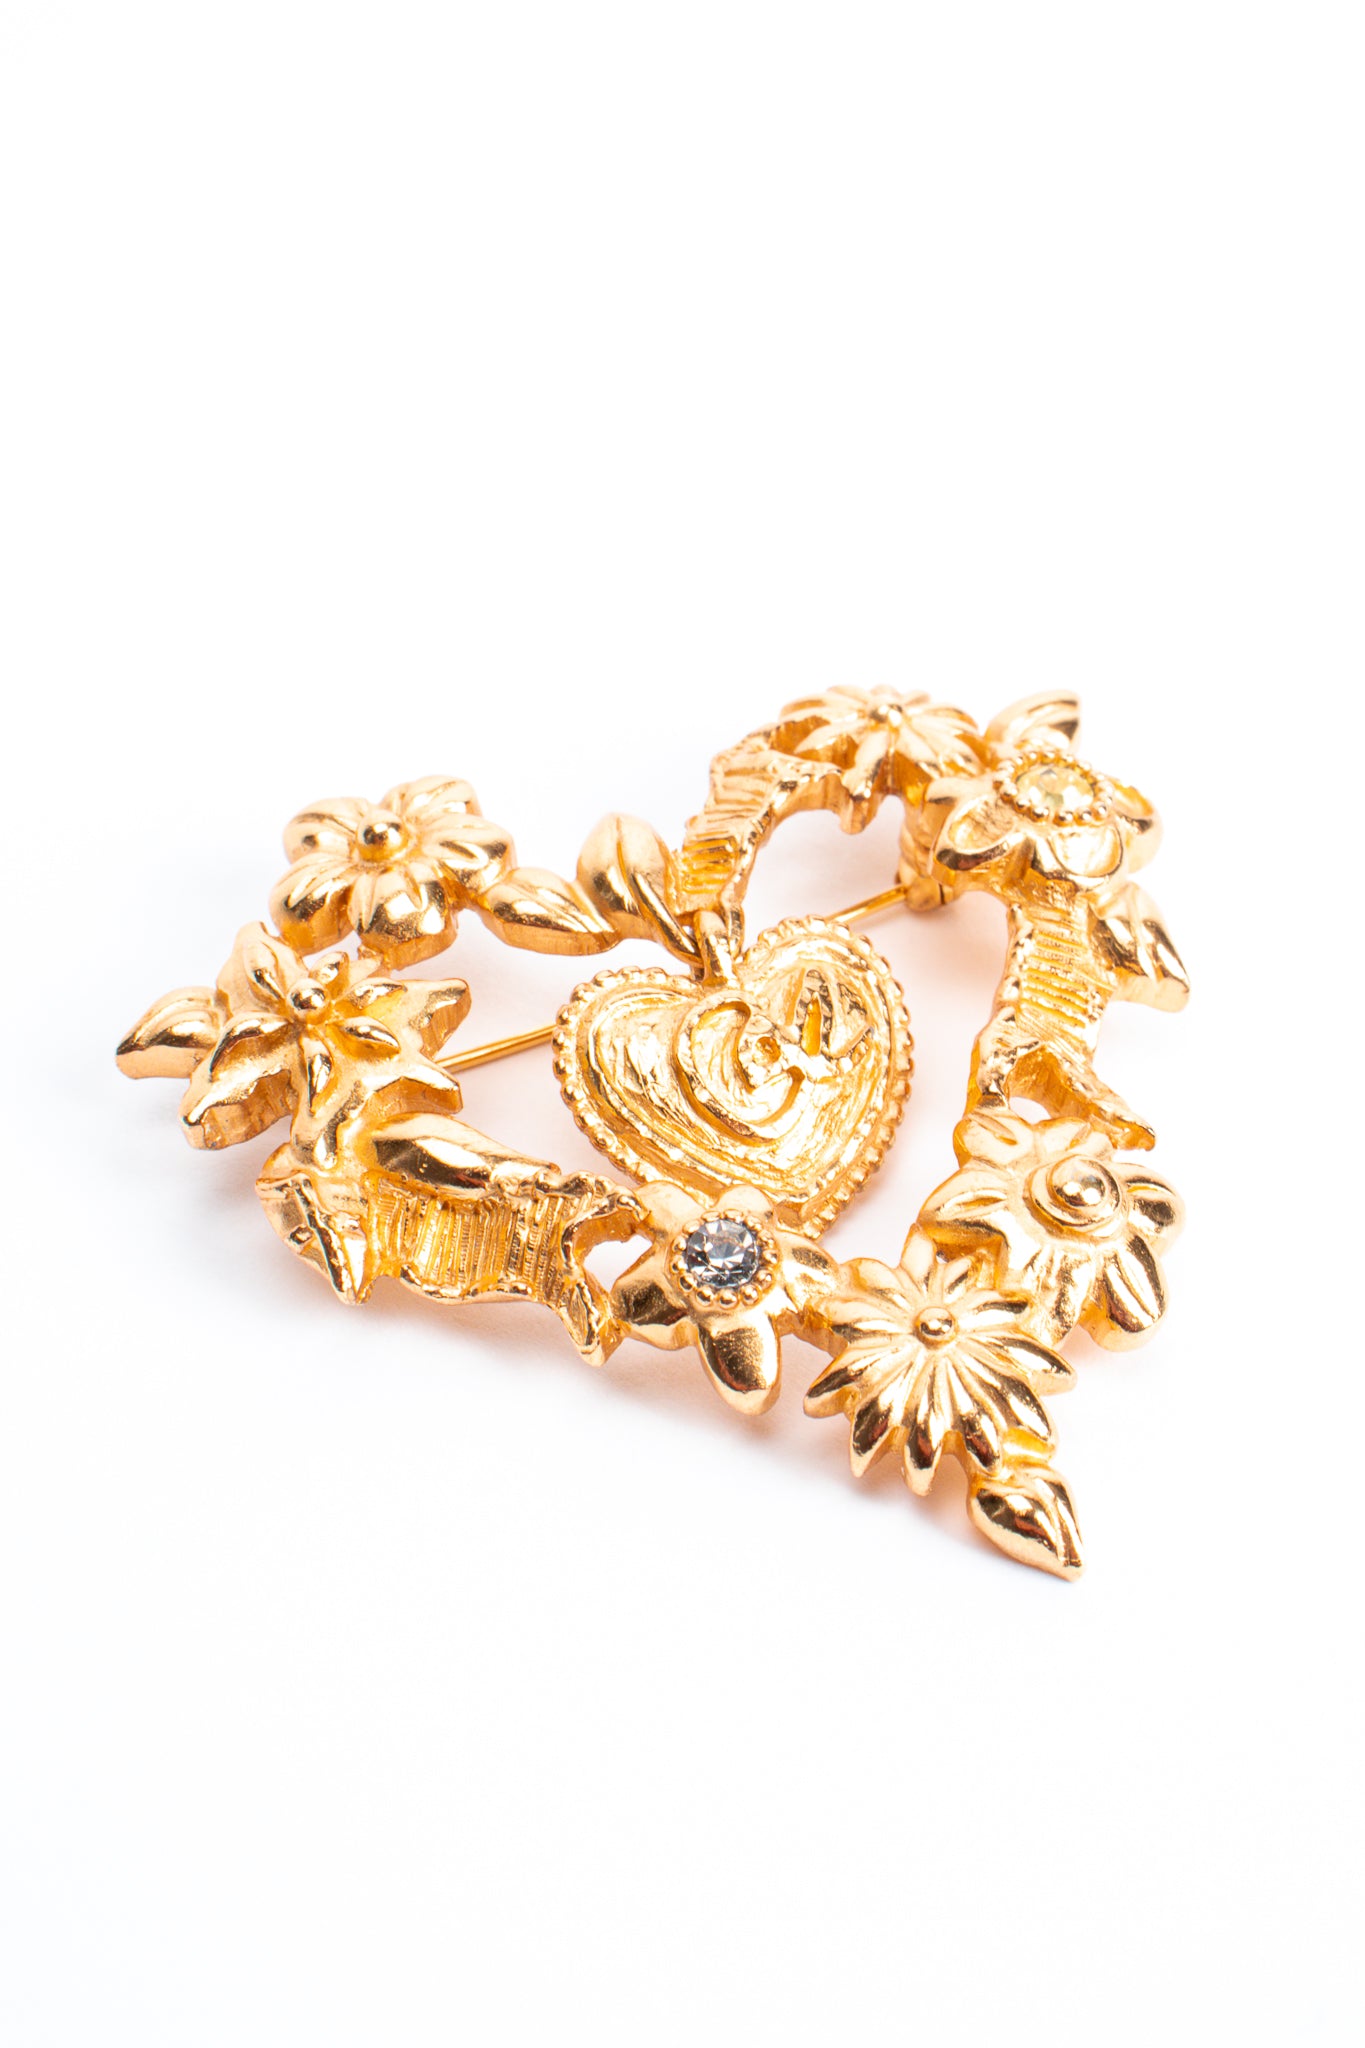 Vintage Christian Lacroix Floral Hearts of Gold Brooch at Recess Los Angeles